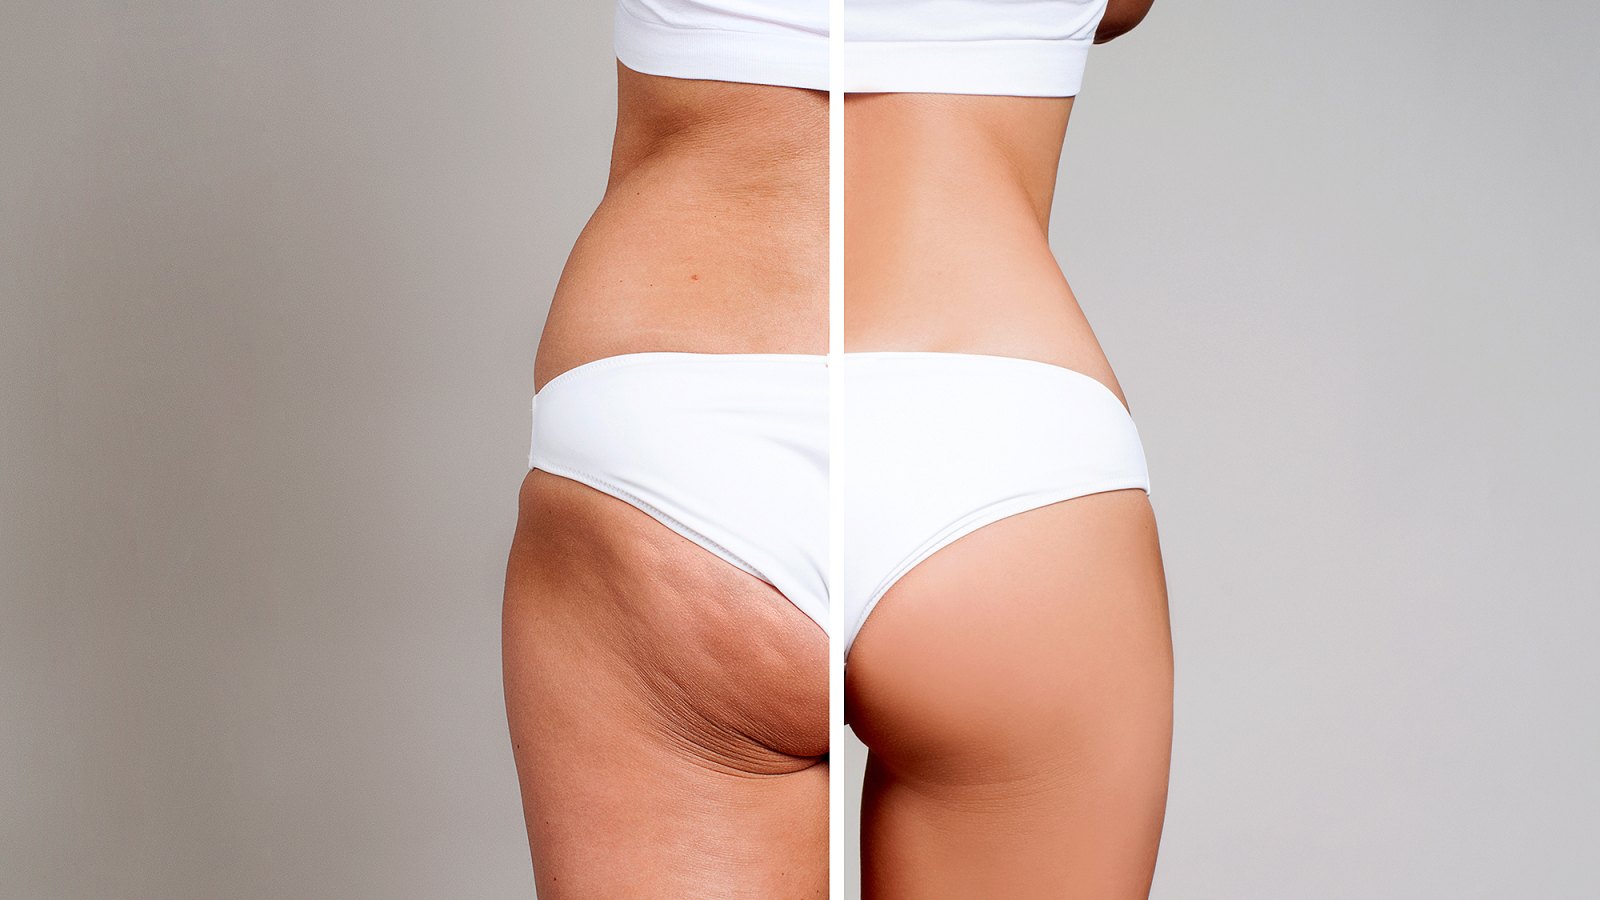 cellulite-treatments-for-women